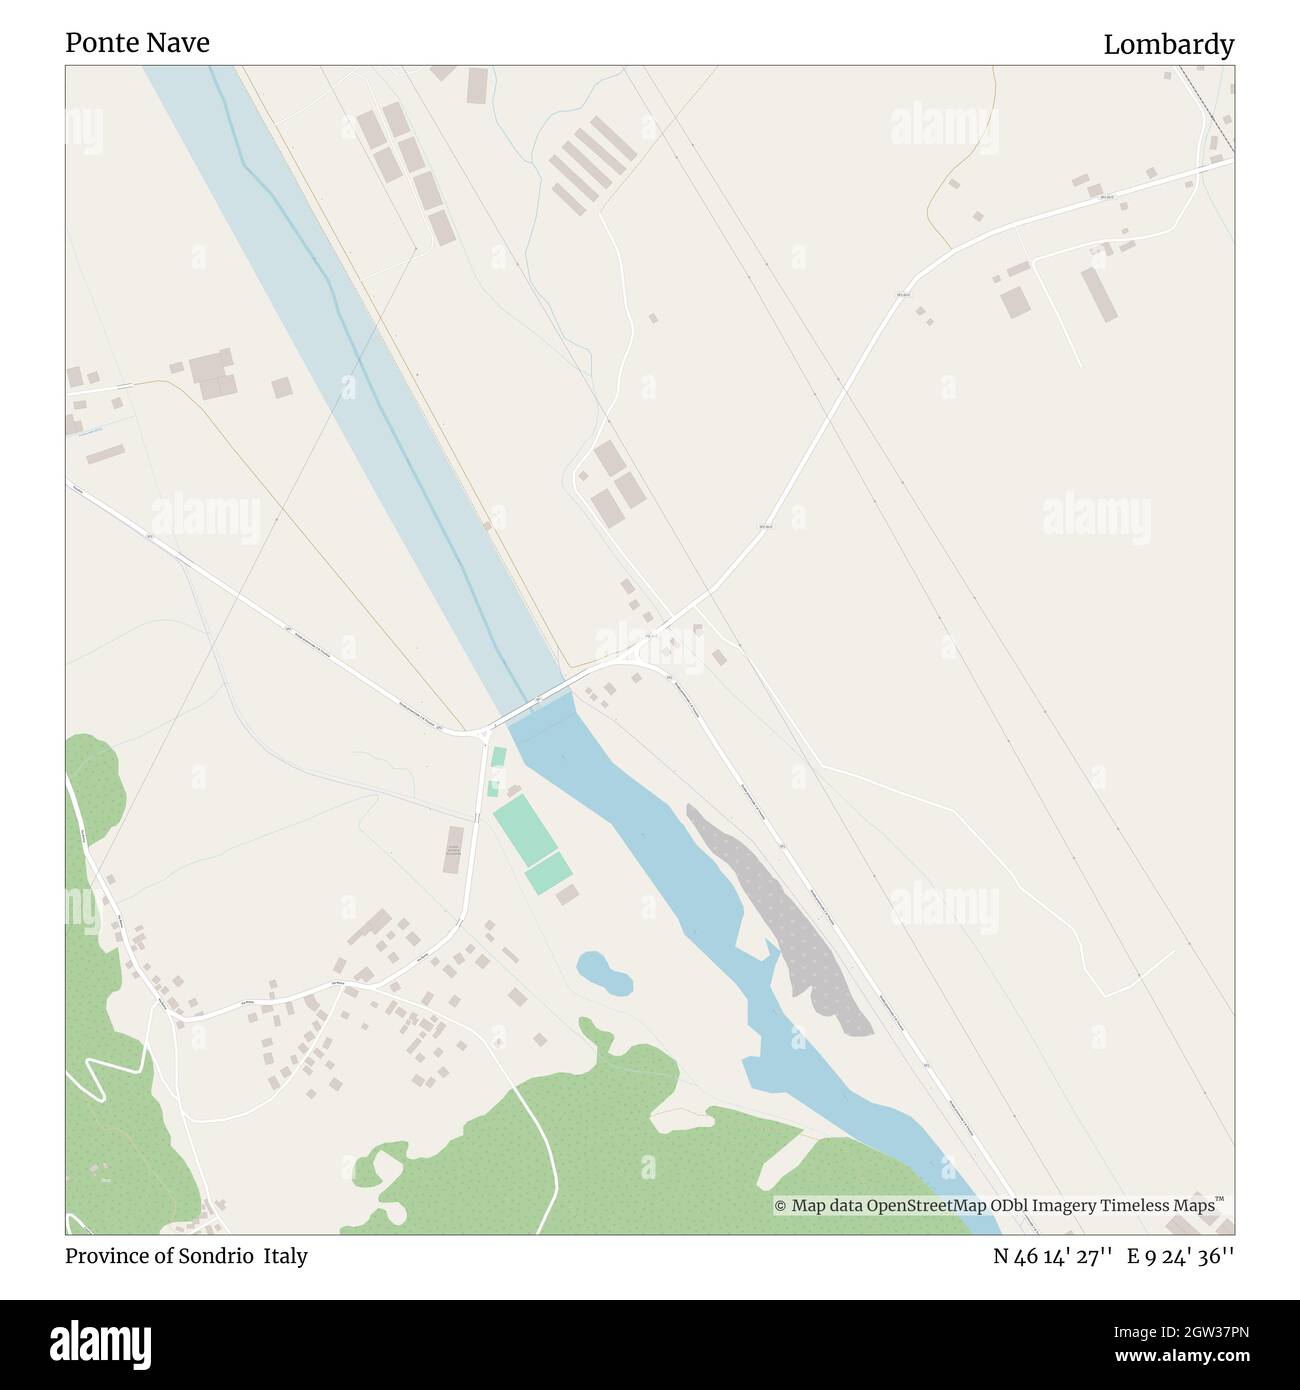 Ponte Nave, Province of Sondrio, Italy, Lombardy, N 46 14' 27'', E 9 24' 36'', map, Timeless Map published in 2021. Travelers, explorers and adventurers like Florence Nightingale, David Livingstone, Ernest Shackleton, Lewis and Clark and Sherlock Holmes relied on maps to plan travels to the world's most remote corners, Timeless Maps is mapping most locations on the globe, showing the achievement of great dreams Stock Photo